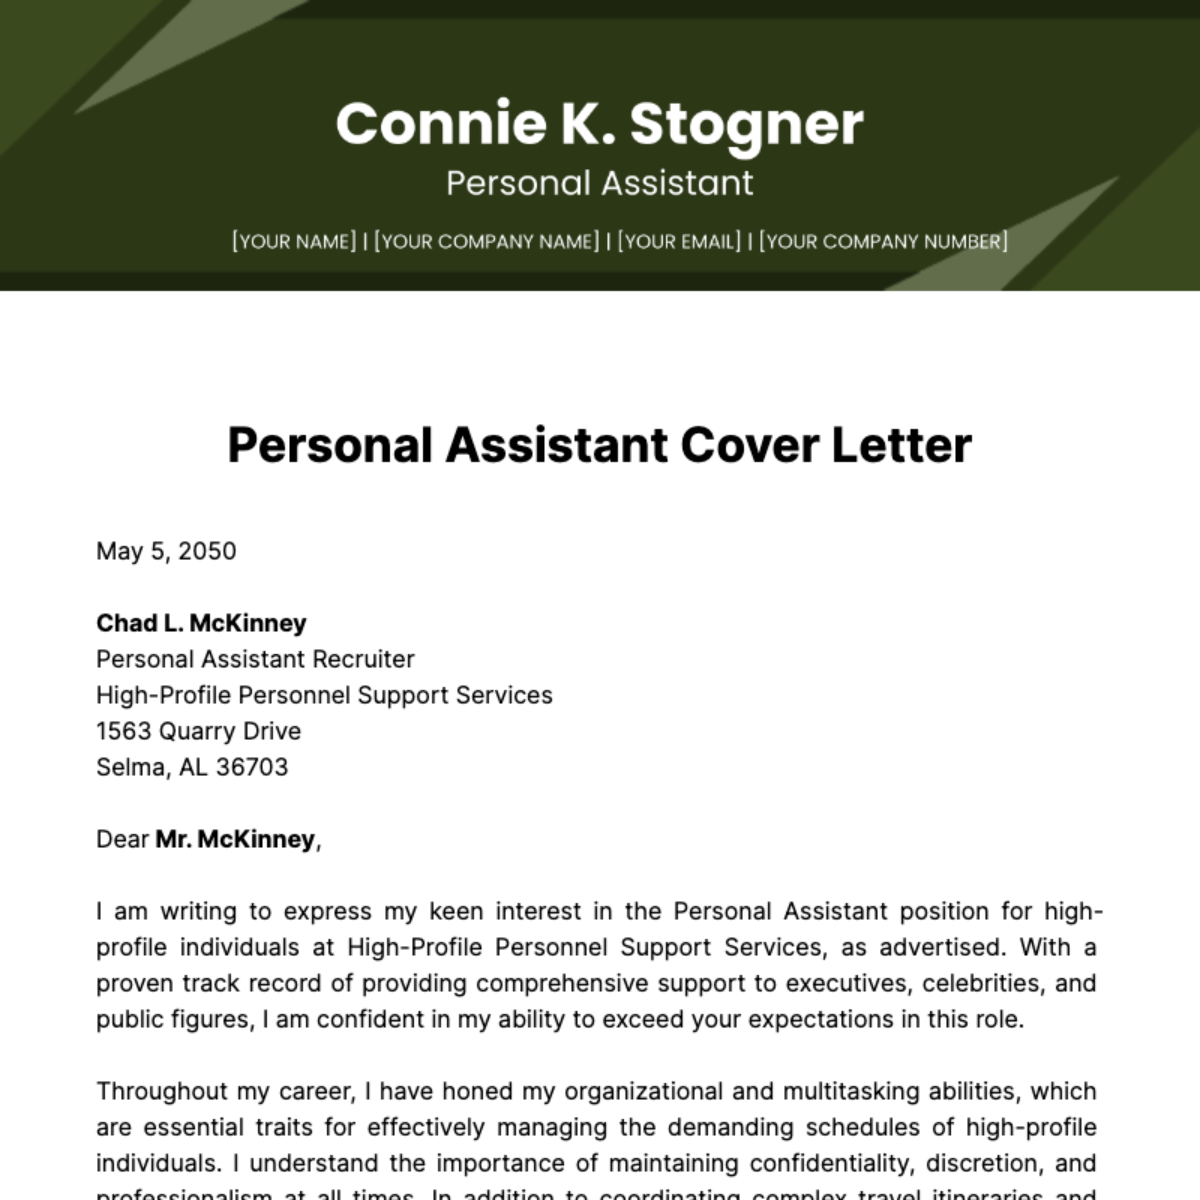 Personal Assistant Cover Letter Template